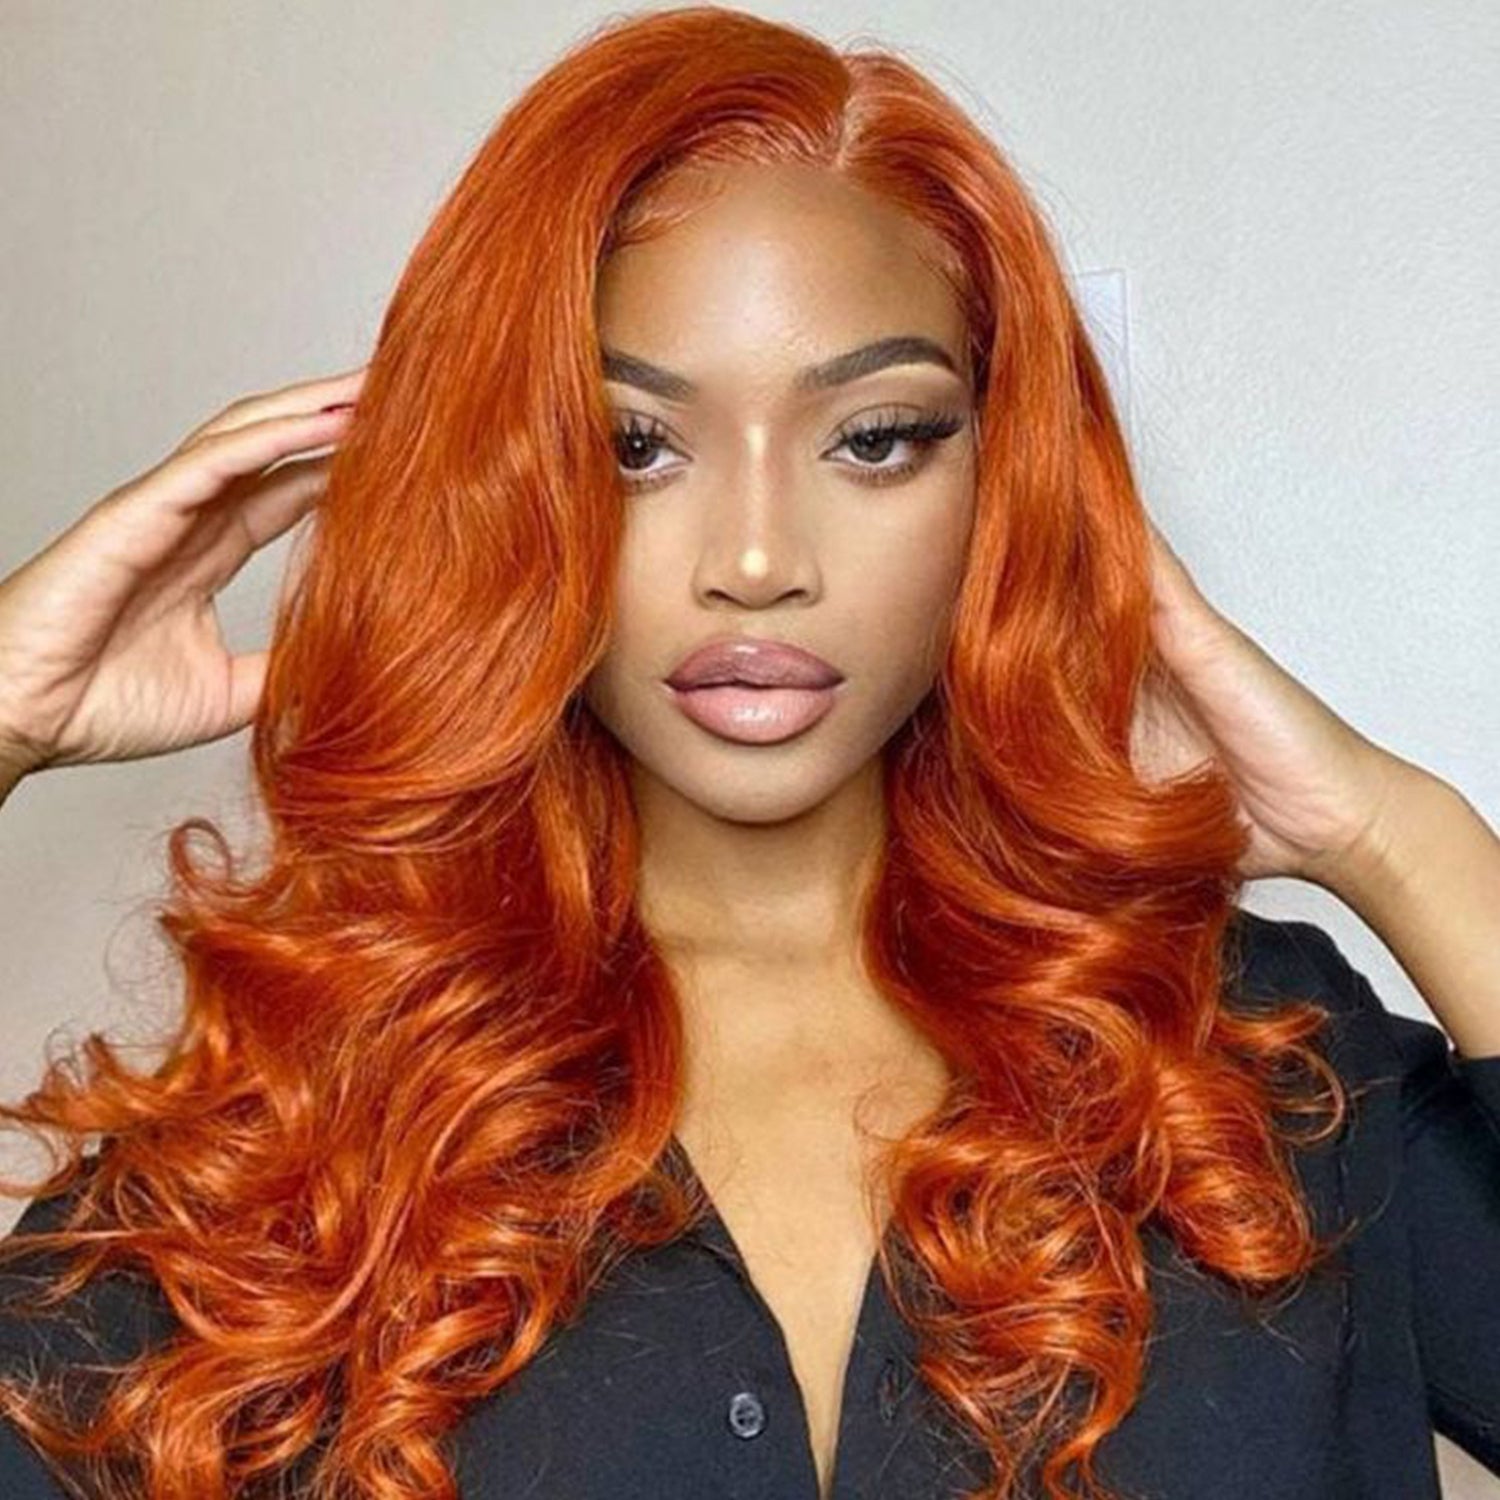 Good quality t-part human hair wigs, Pre-plucked with baby hair and natural look, Middle part wig of easy and comfortable to wear, Reasonable price for fancy colored wigs, Ginger orange color gives you a trendy look, Prevent hair damage with this Pre-Bleached & dyed wig by experts